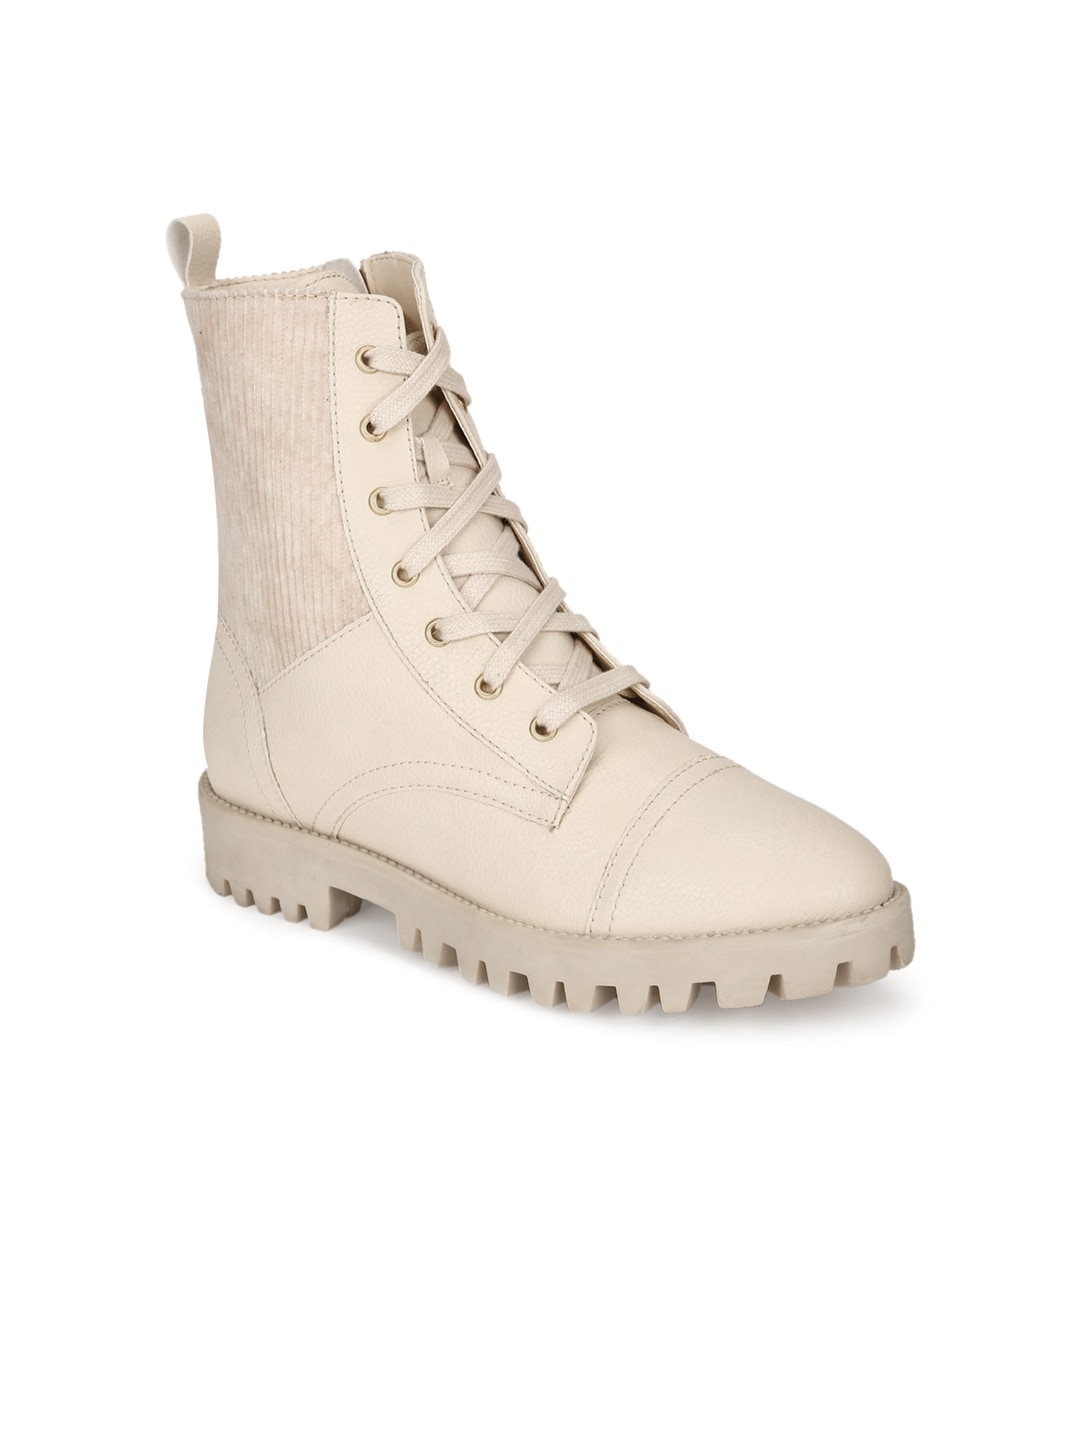 Truffle Collection Cream-Coloured Solid High-Top Platform Heeled Boots Price in India